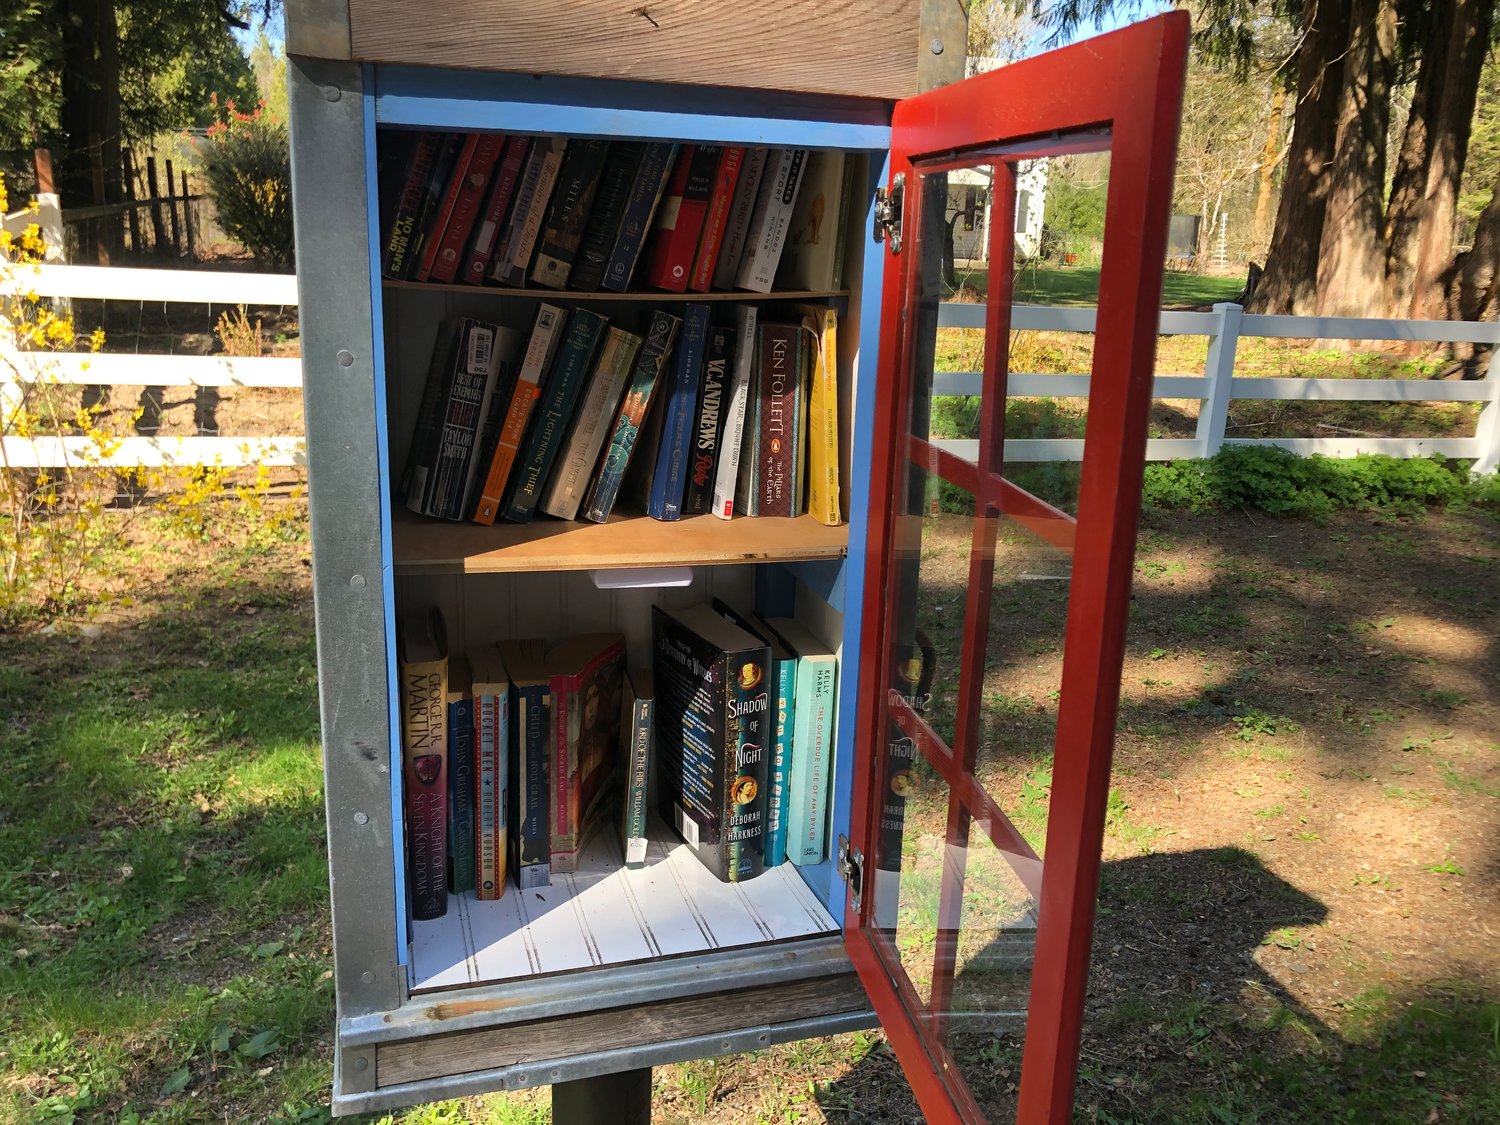 The close-up of the little library reveals the book titles.